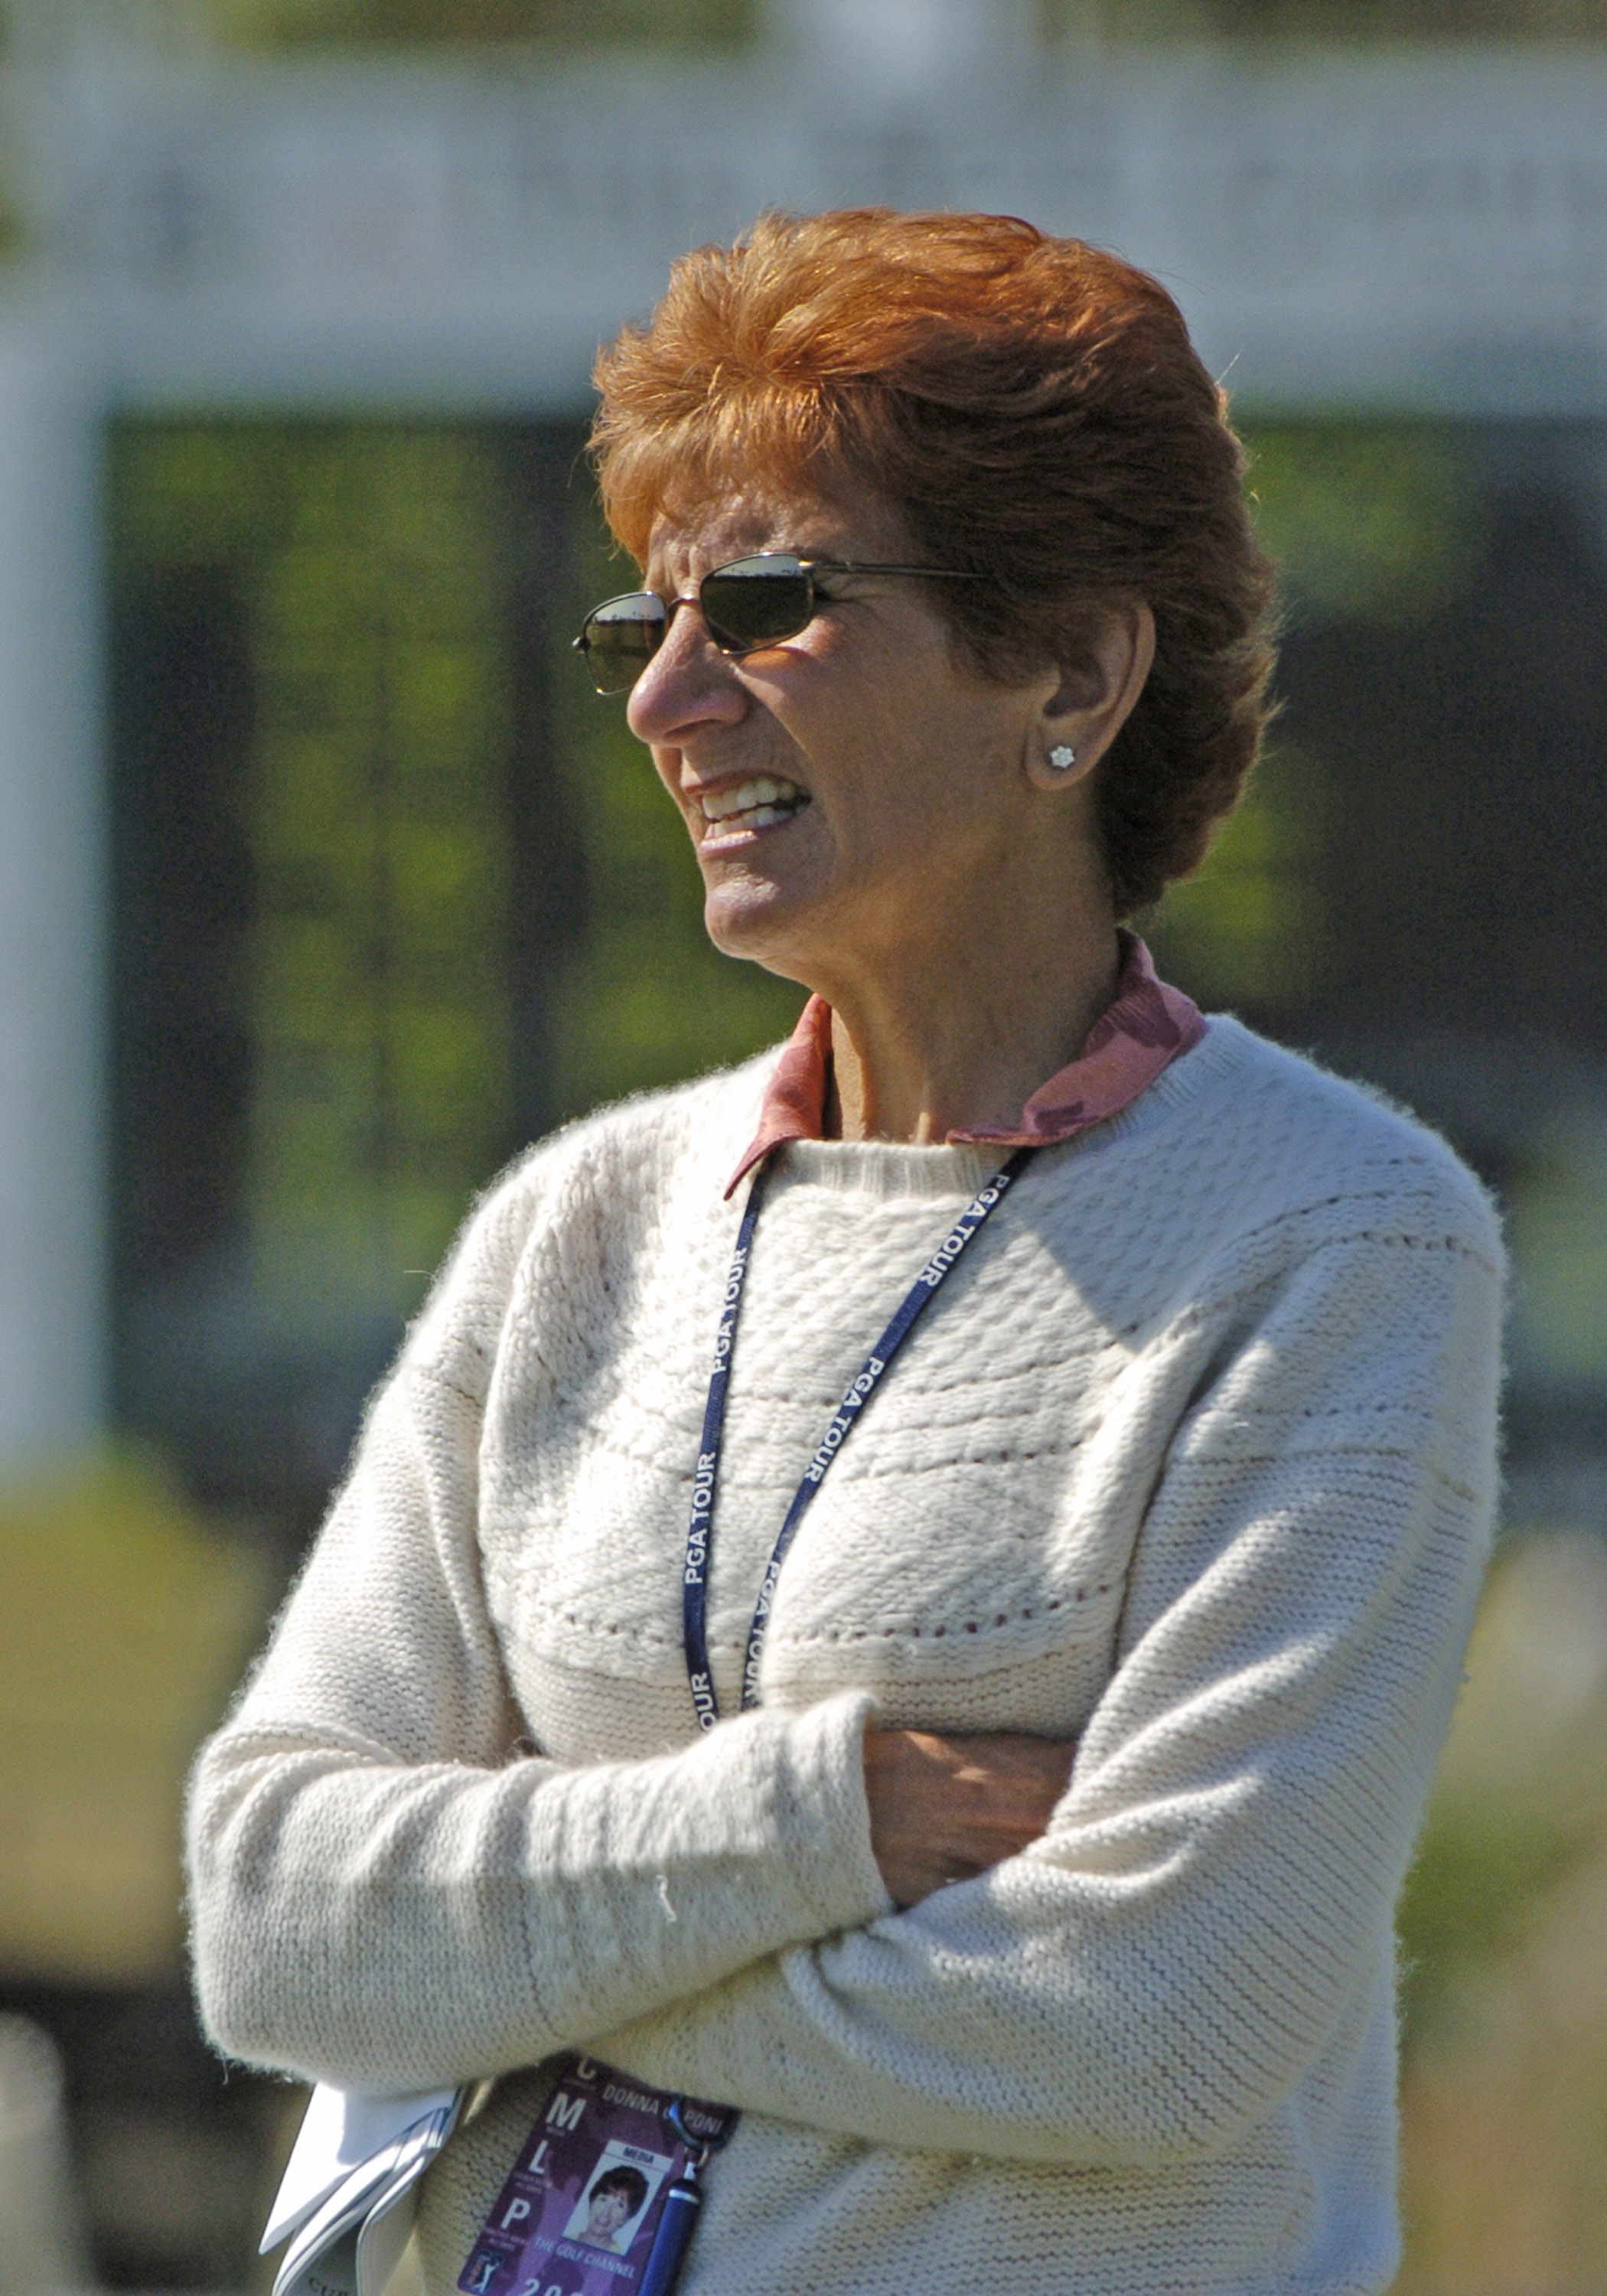 UNITED STATES - FEBRUARY 19:  Golf Channel commentator Donna Caponi watches play during the second round of the PGA Champions Tour ACE Classic, February 19, 2005 in Naples, Florida.  (Photo by Al Messerschmidt/Getty Images)